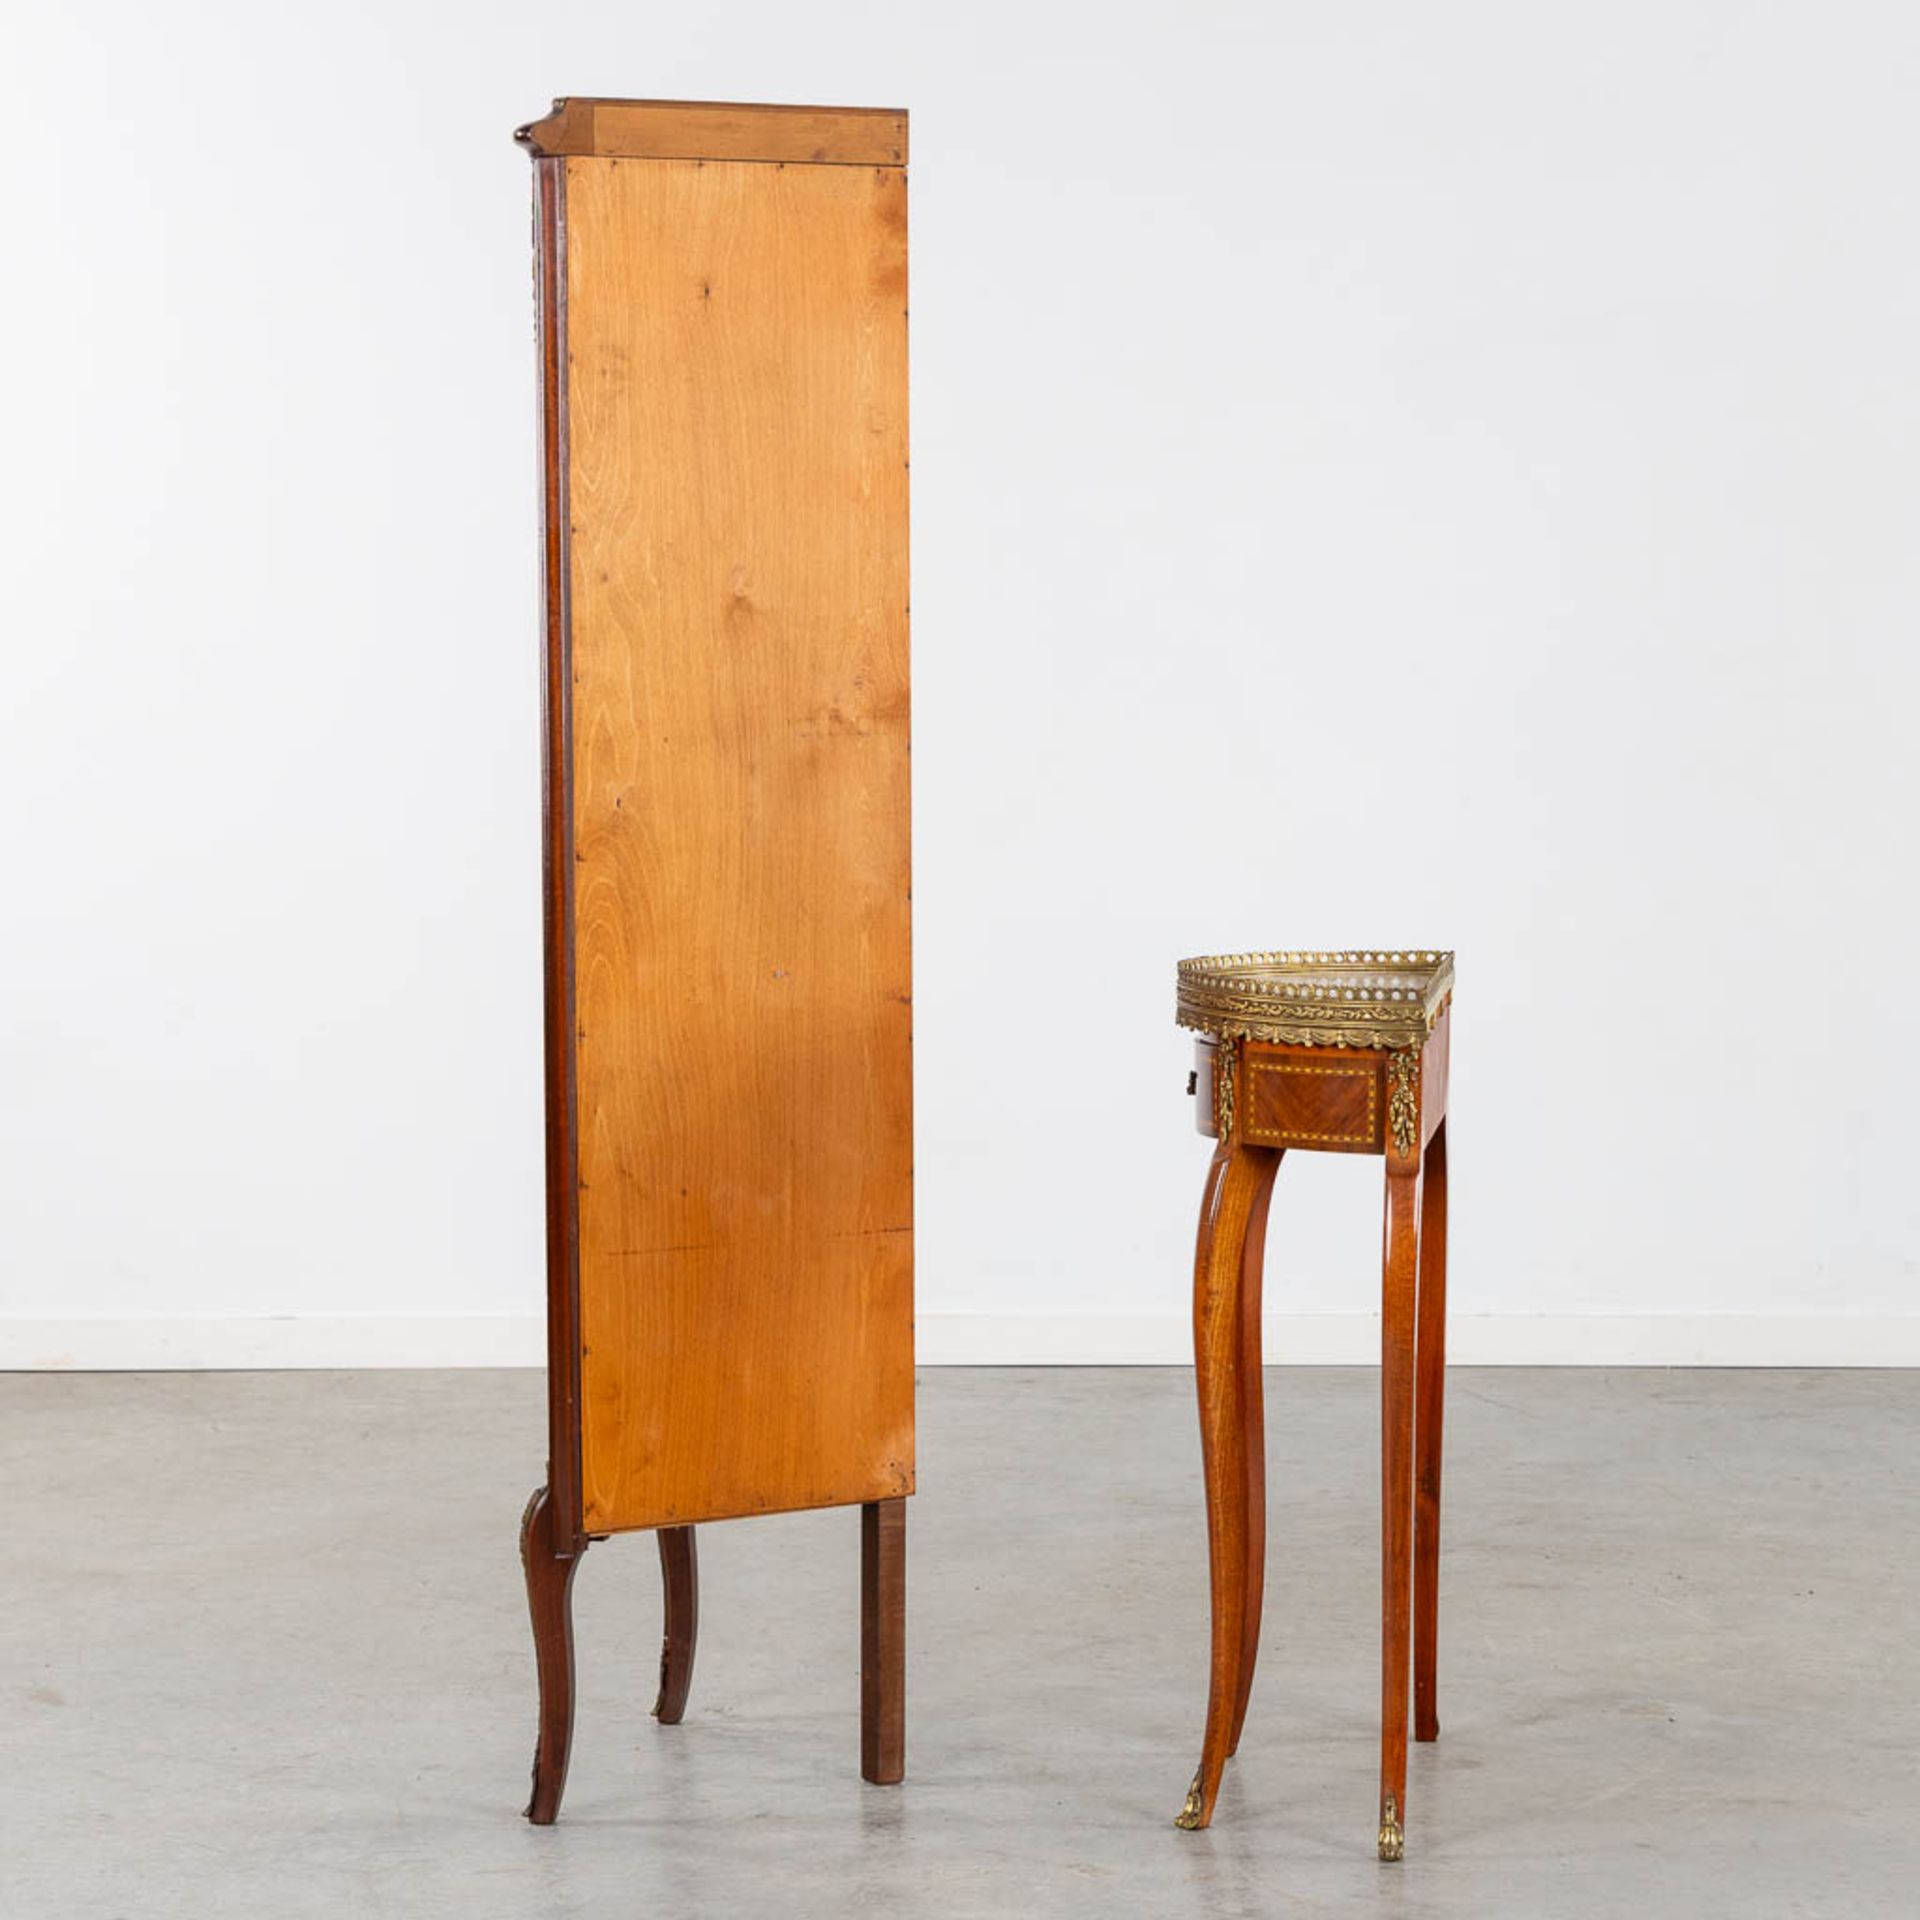 A corner cabinet and console table, marquetry mounted with bronze. 20th C. (L:34 x W:54 x H:150 cm) - Image 6 of 10